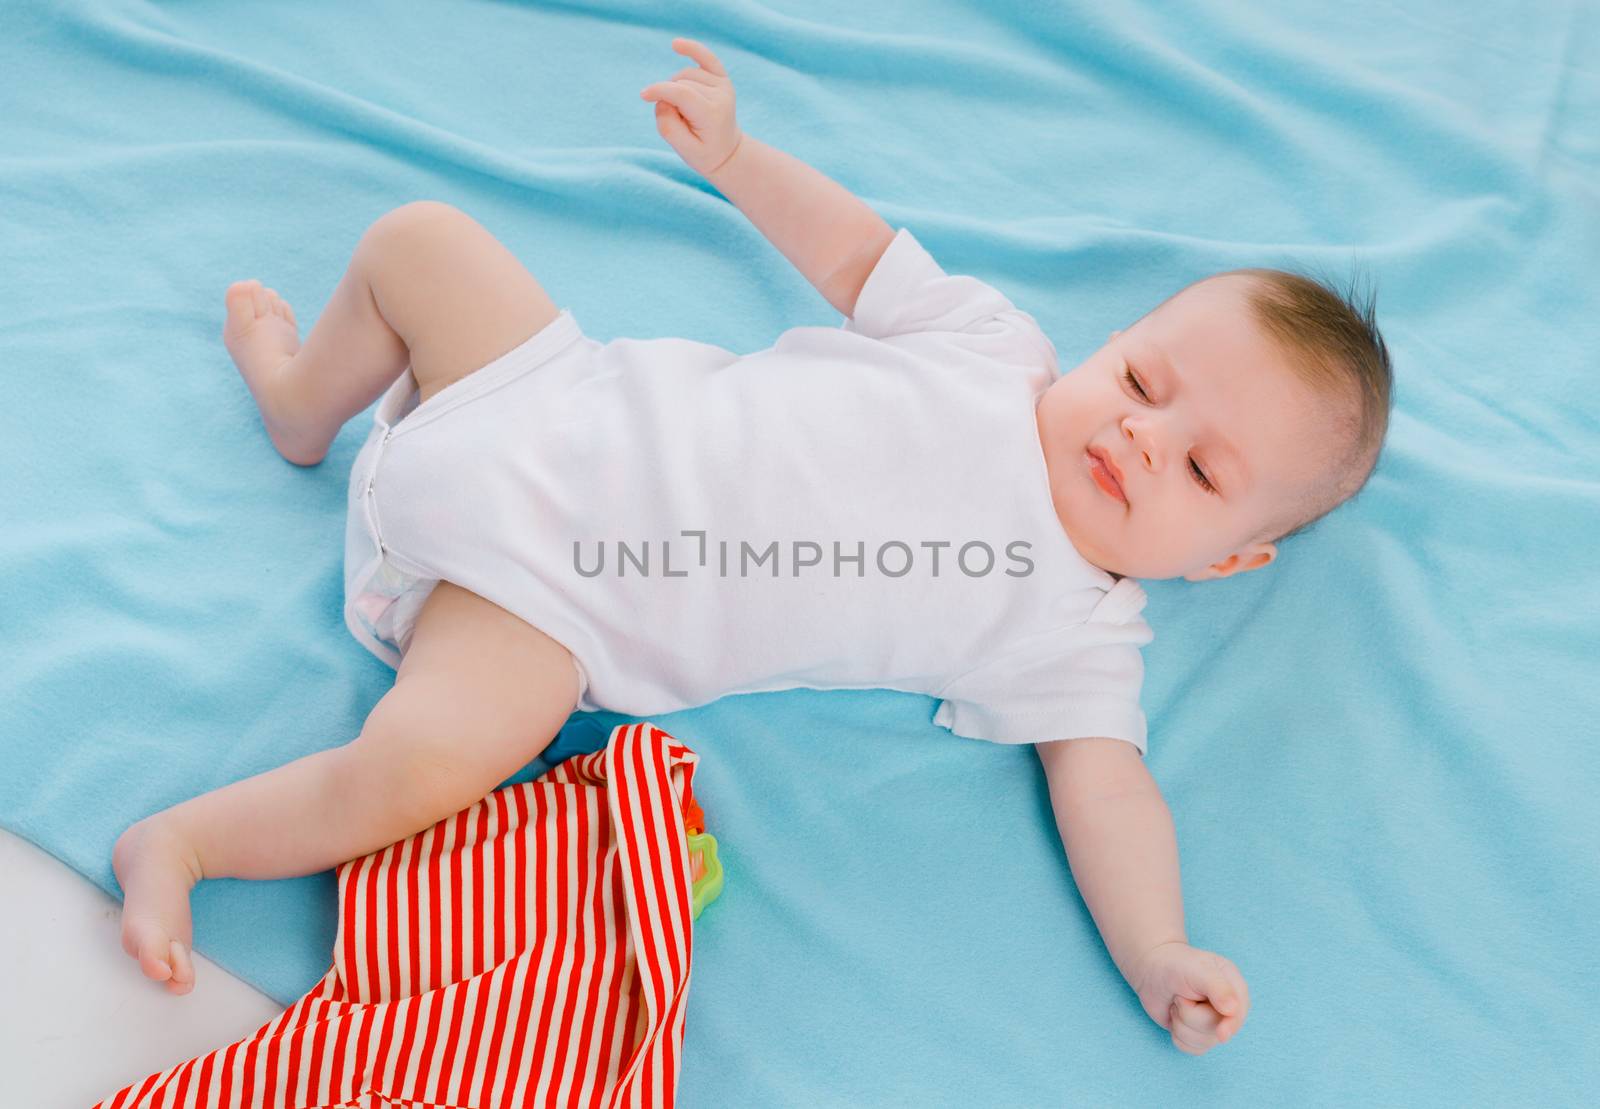 dissatisfied baby lying on a blue blanket